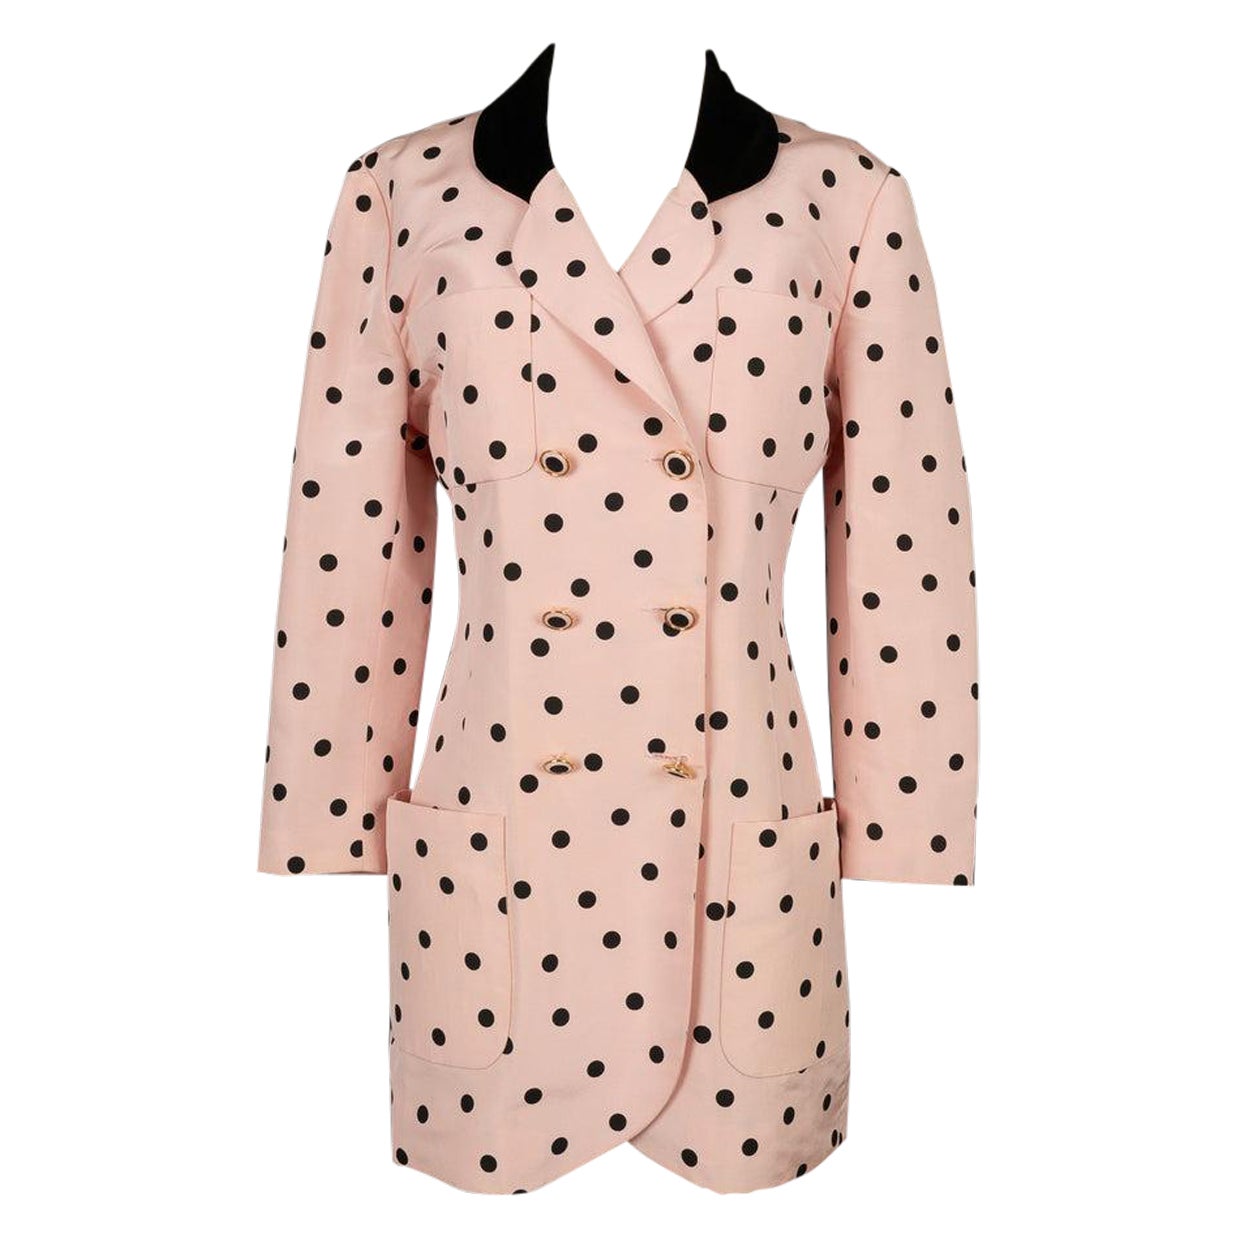 Chanel Pink Silk Jacket with Black Polka Dots, 1988 For Sale